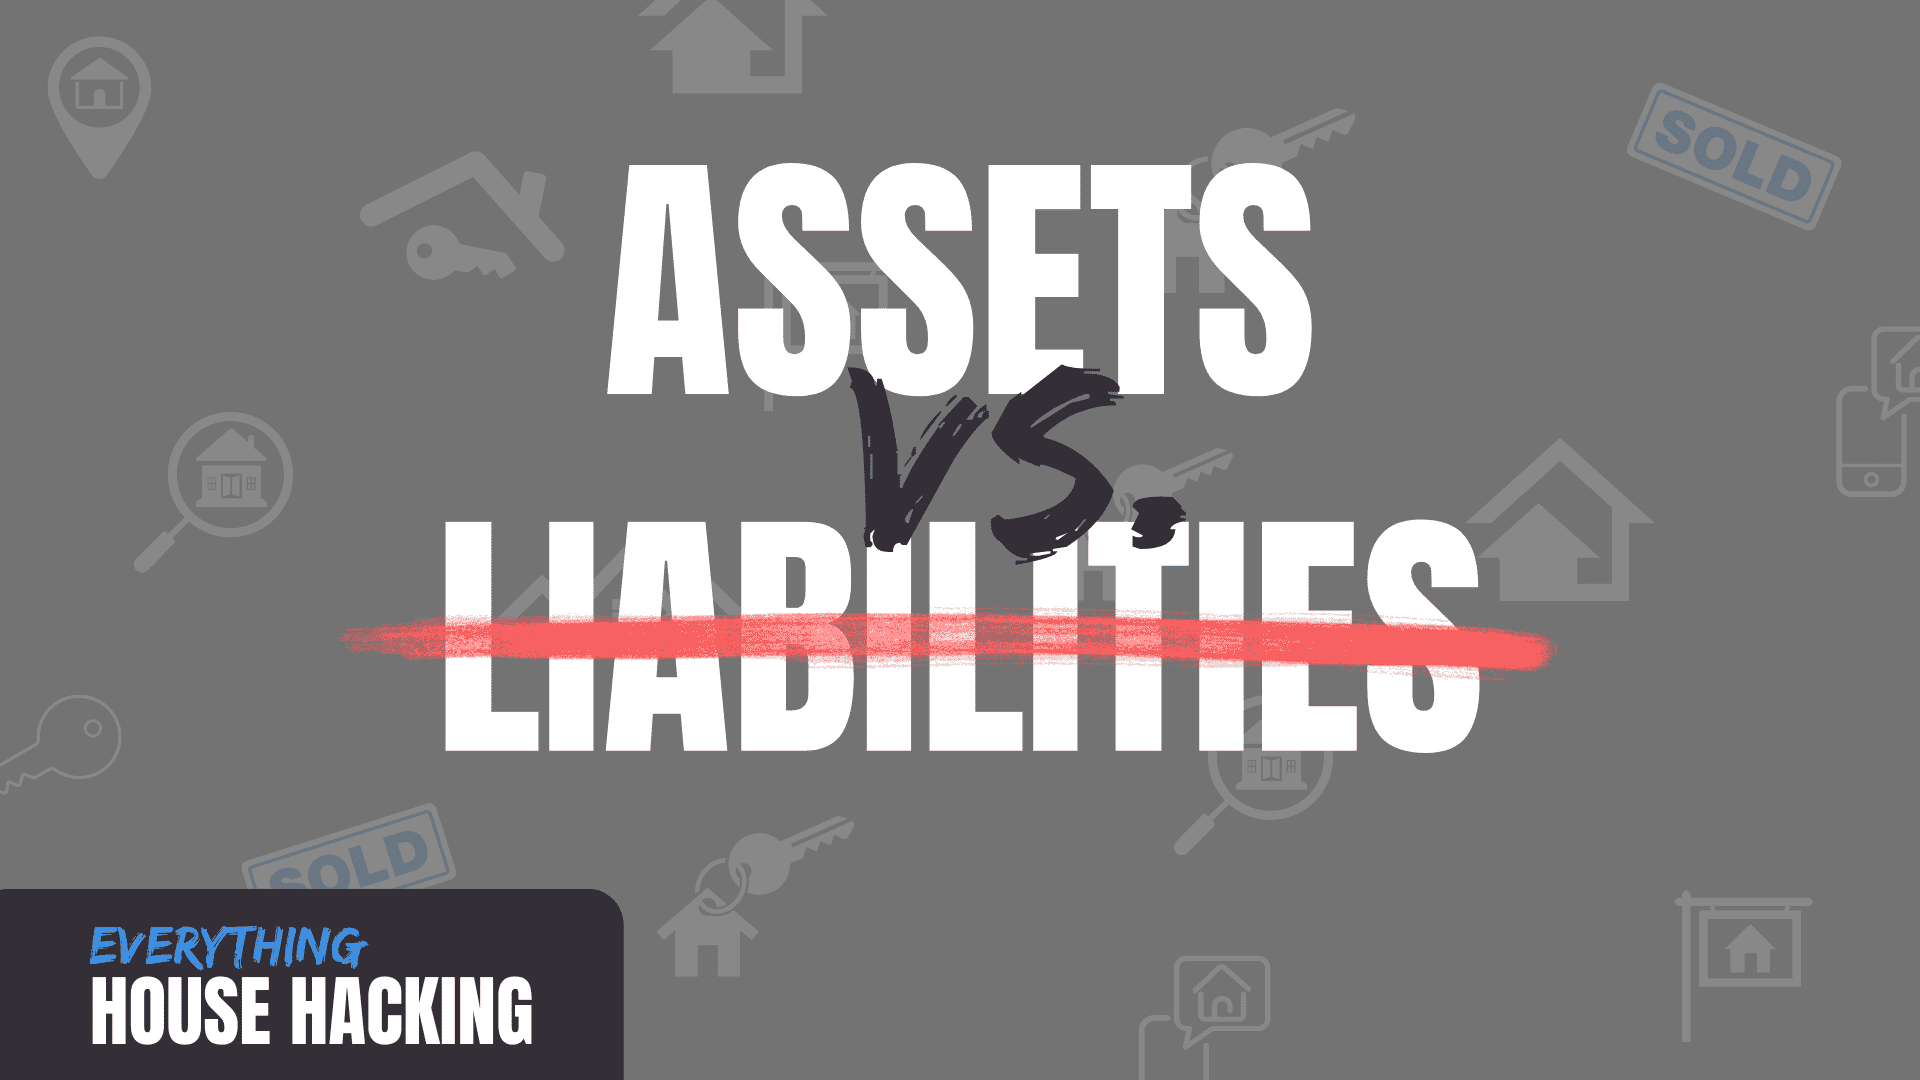 Assets vs liabilities in white text on gray background with liabilities crossed out